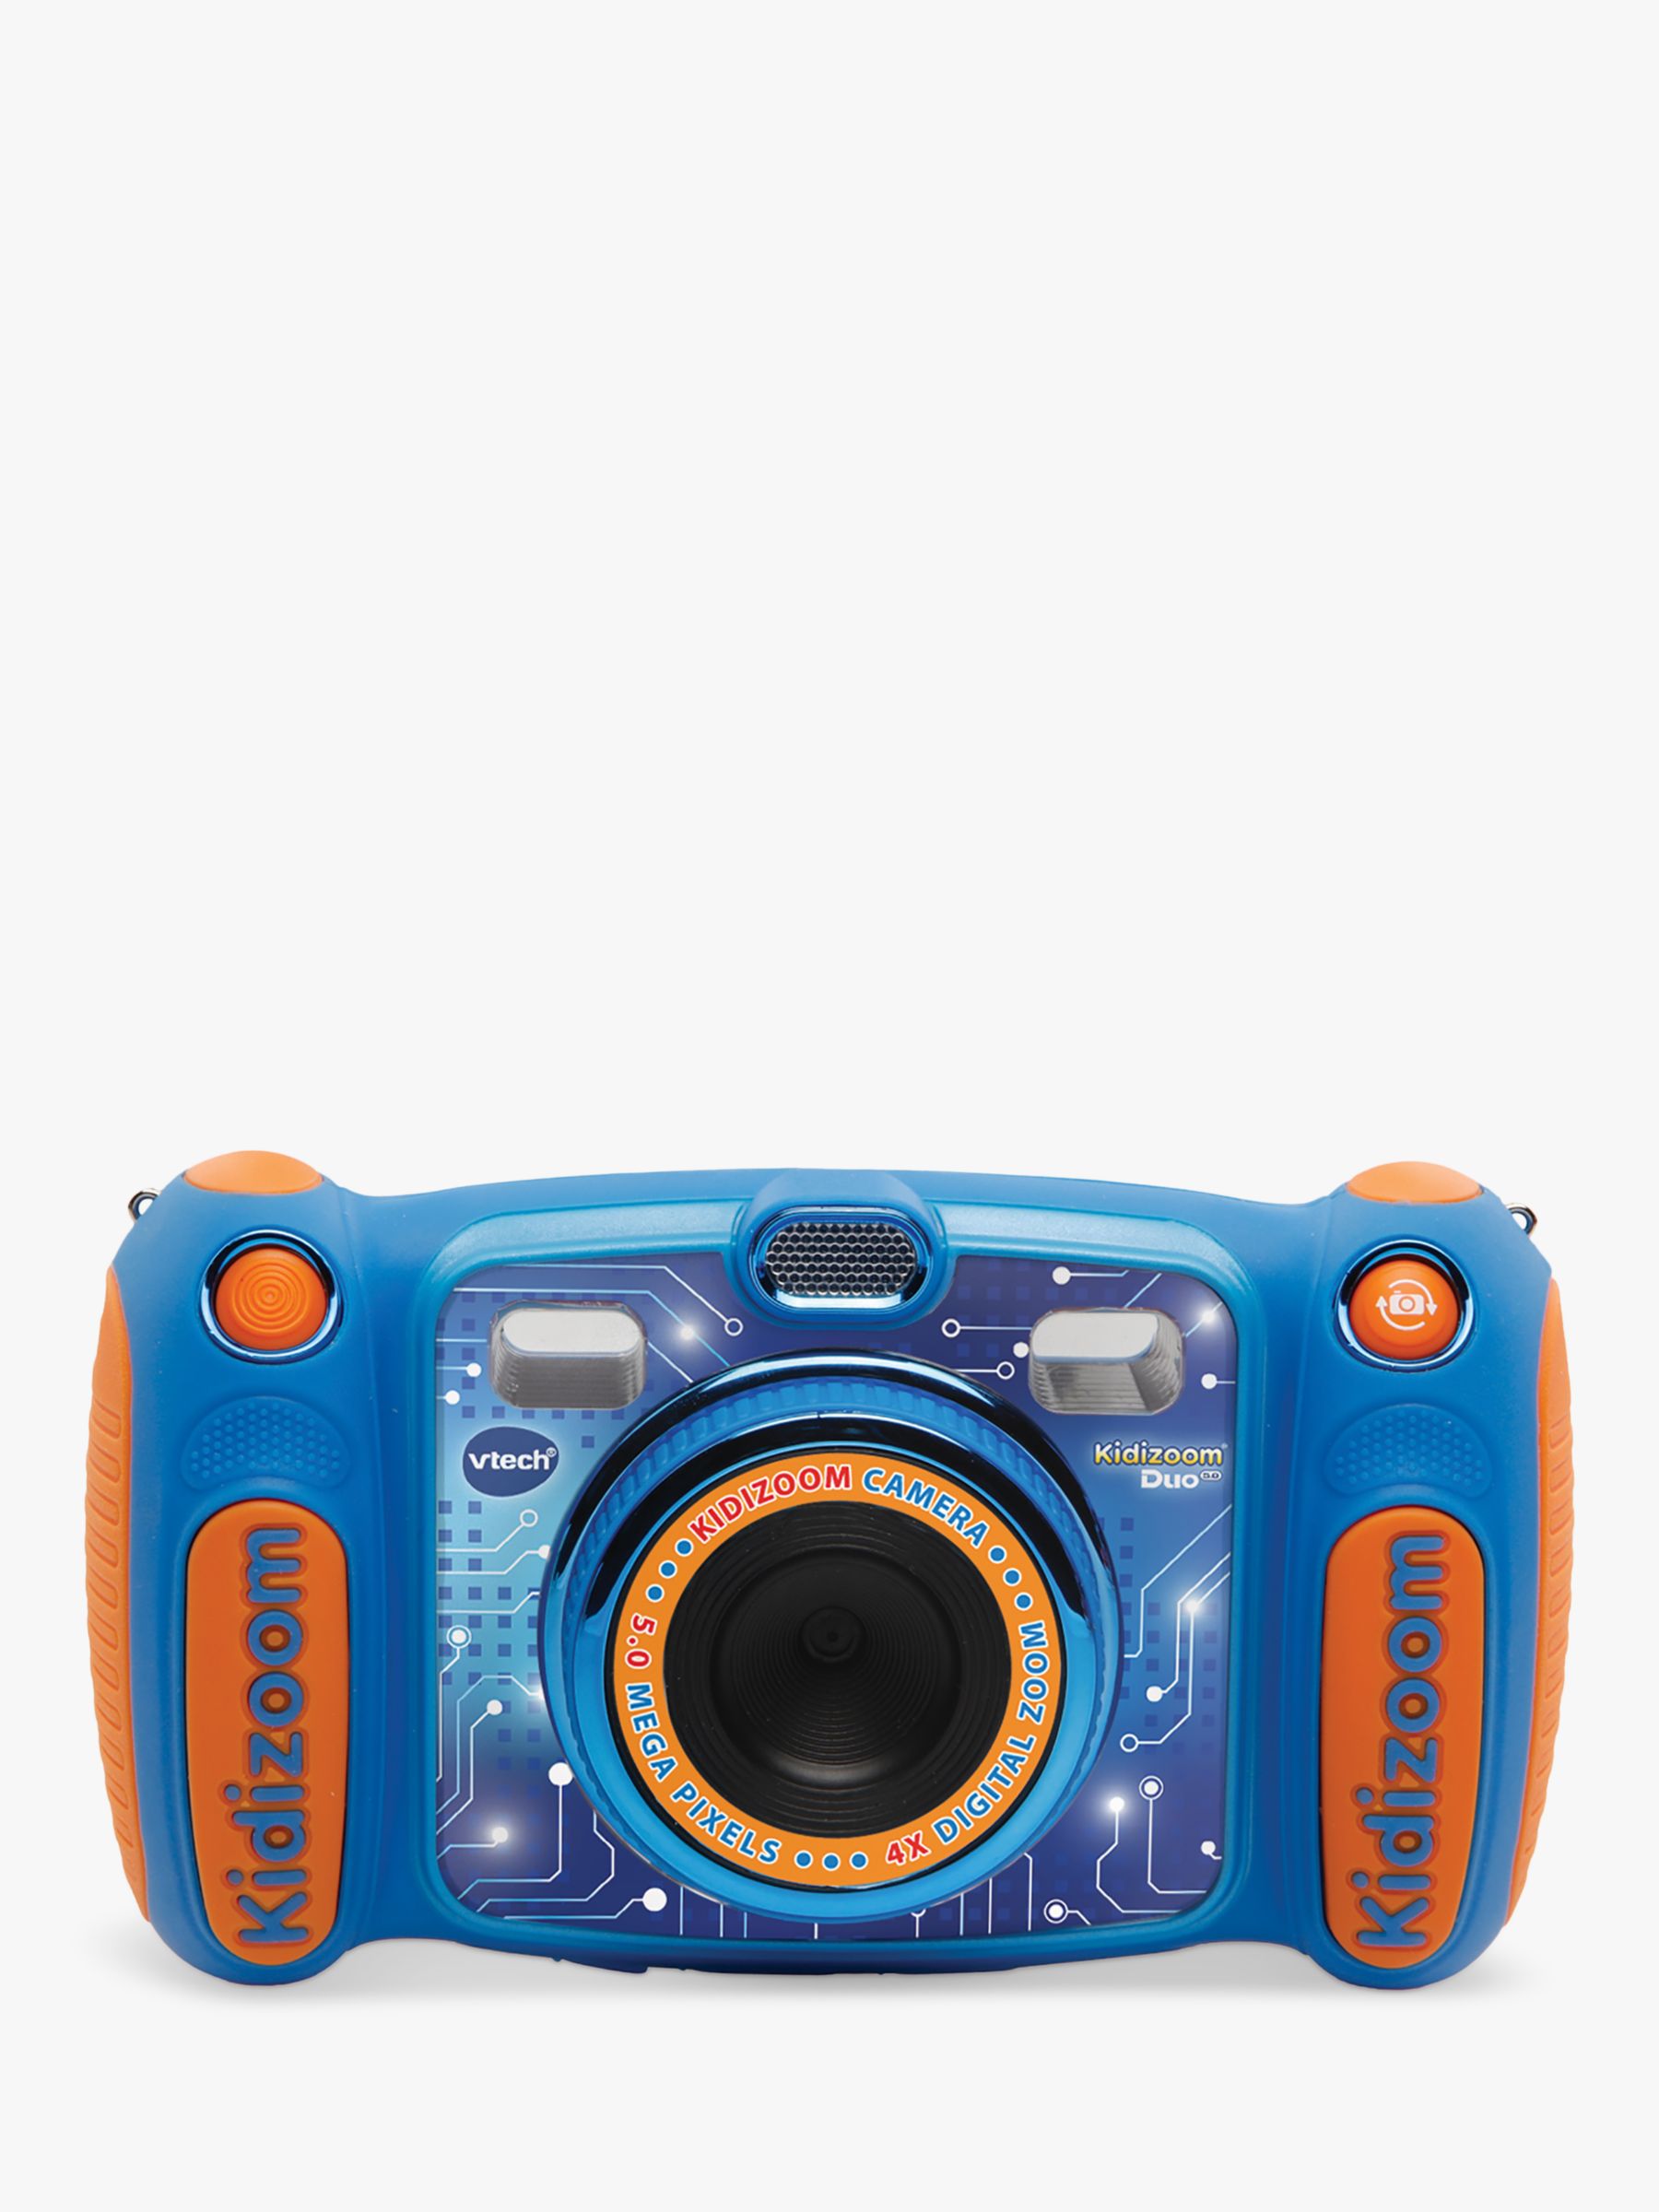 VTech Kidizoom 5.0 Megapixel Duo Children's Camera with 4GB SD